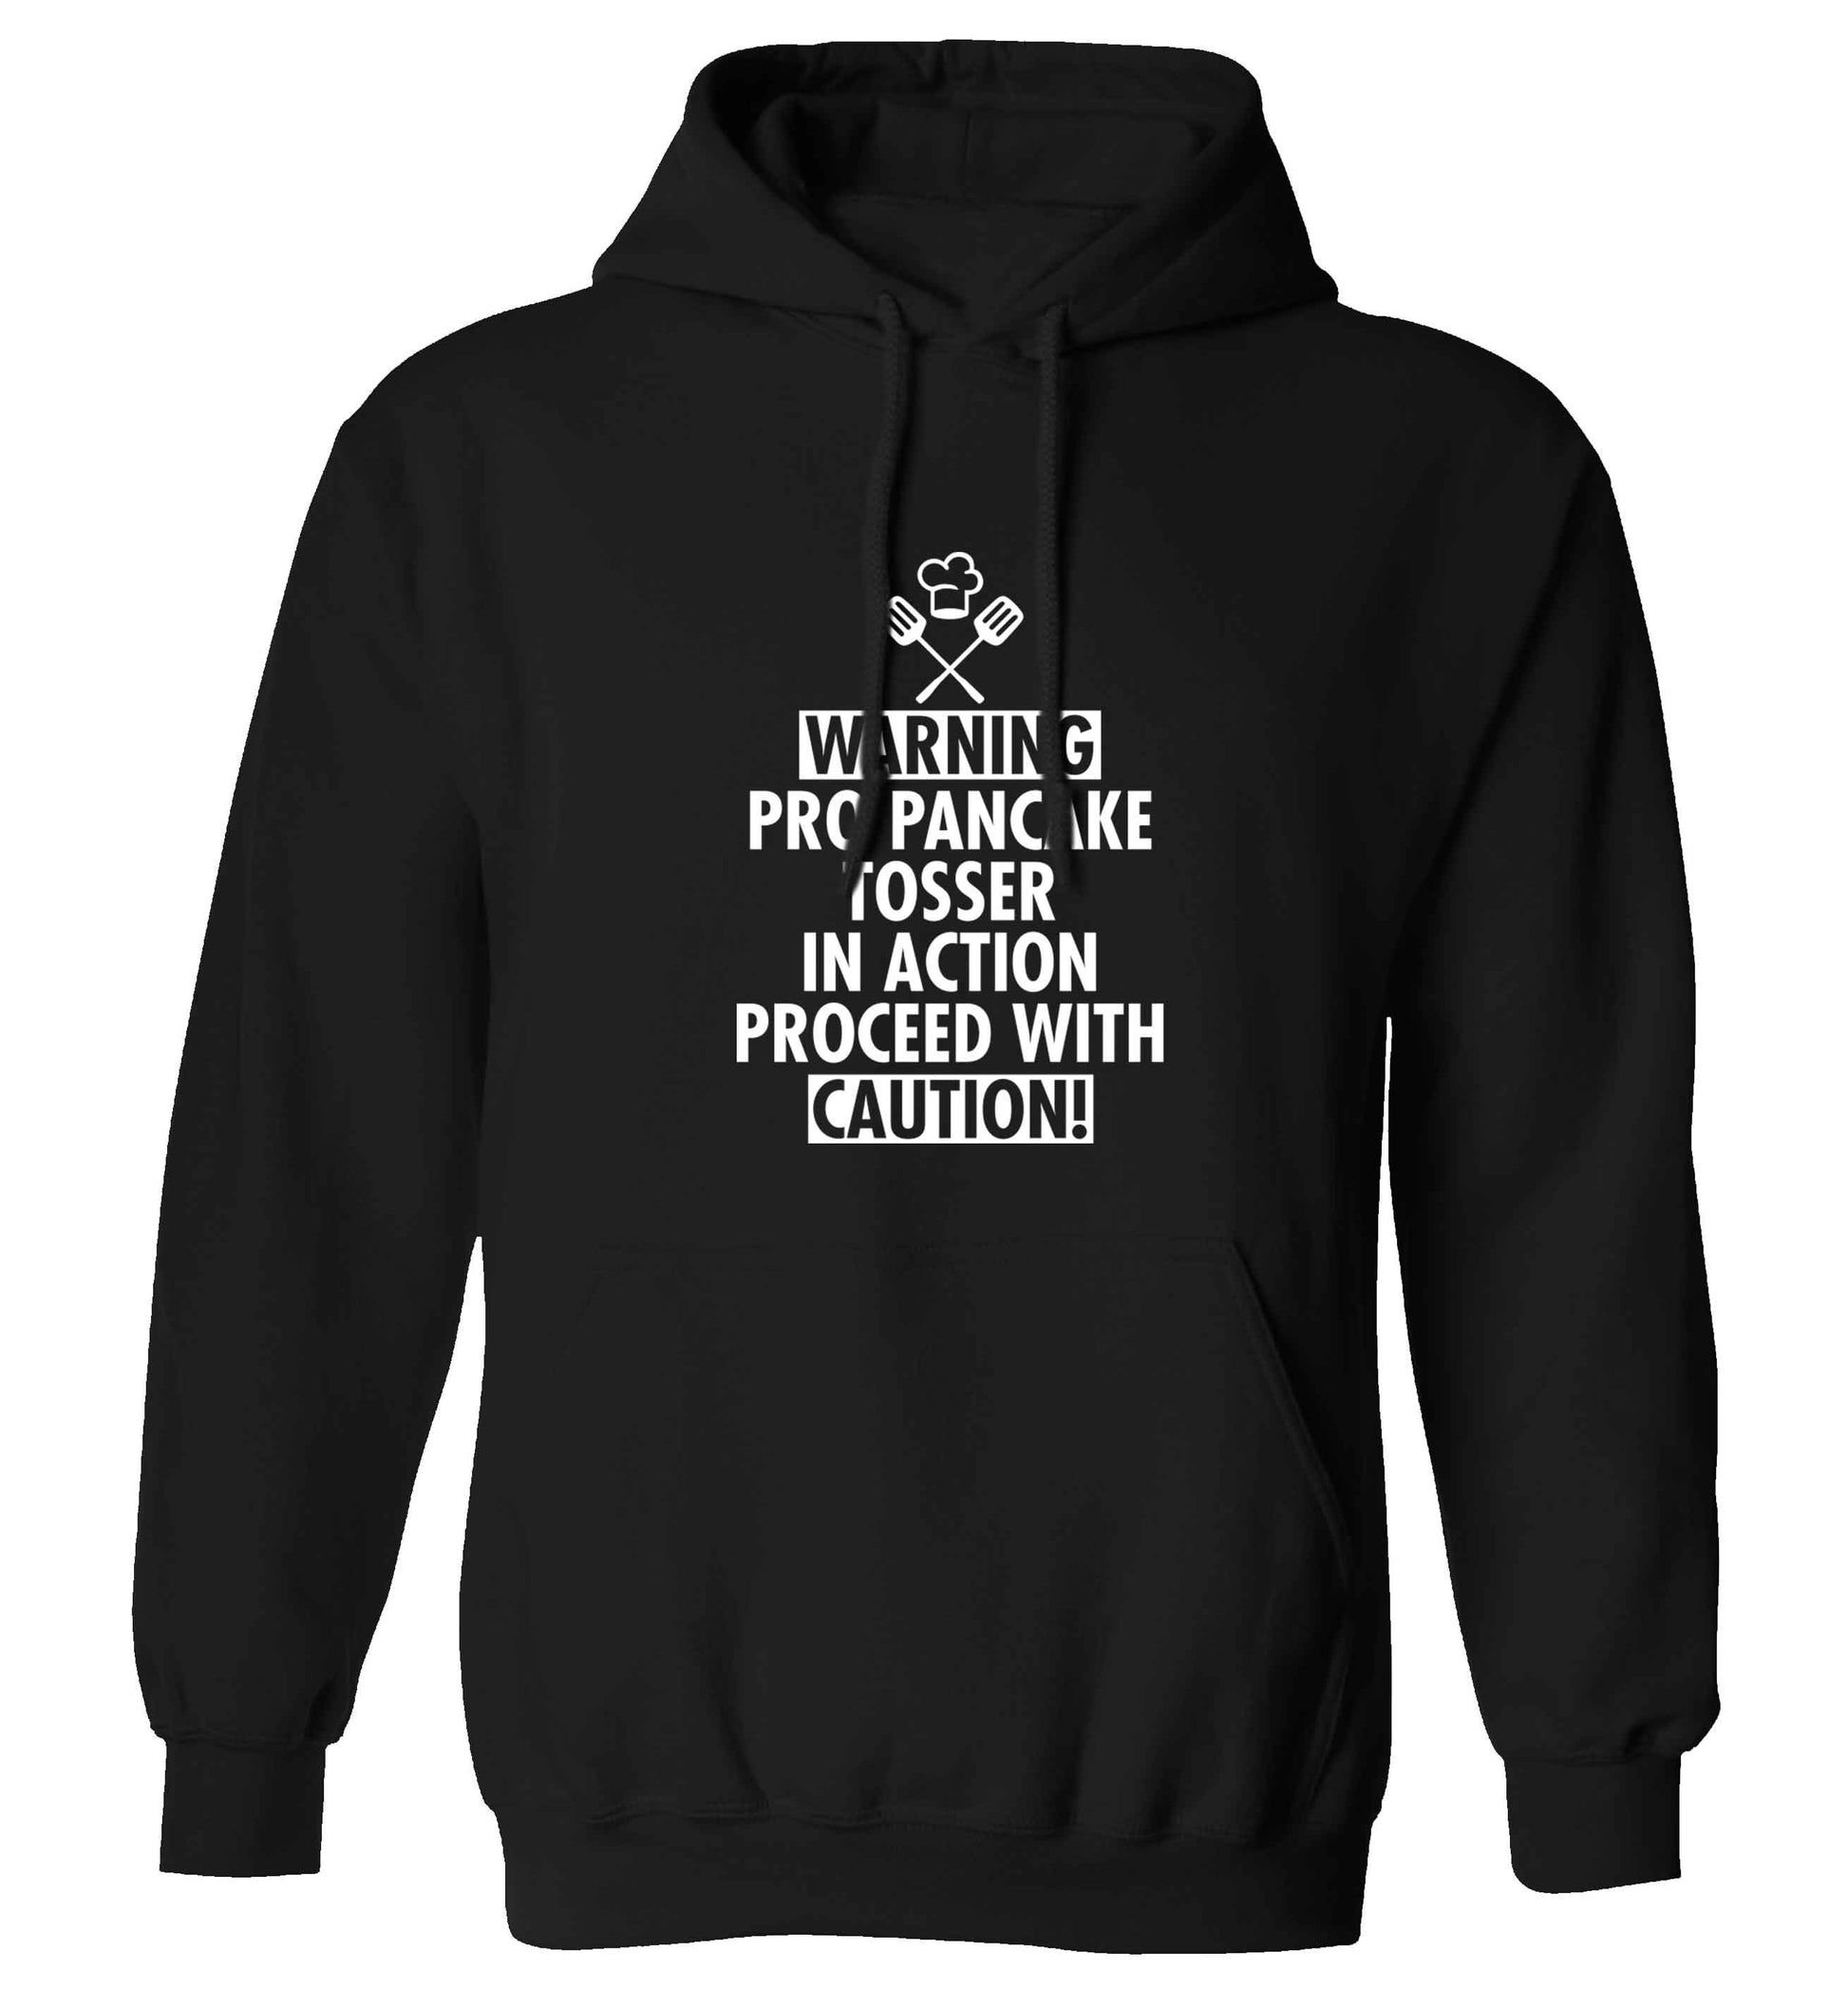 Warning pro pancake tosser in action proceed with caution adults unisex black hoodie 2XL